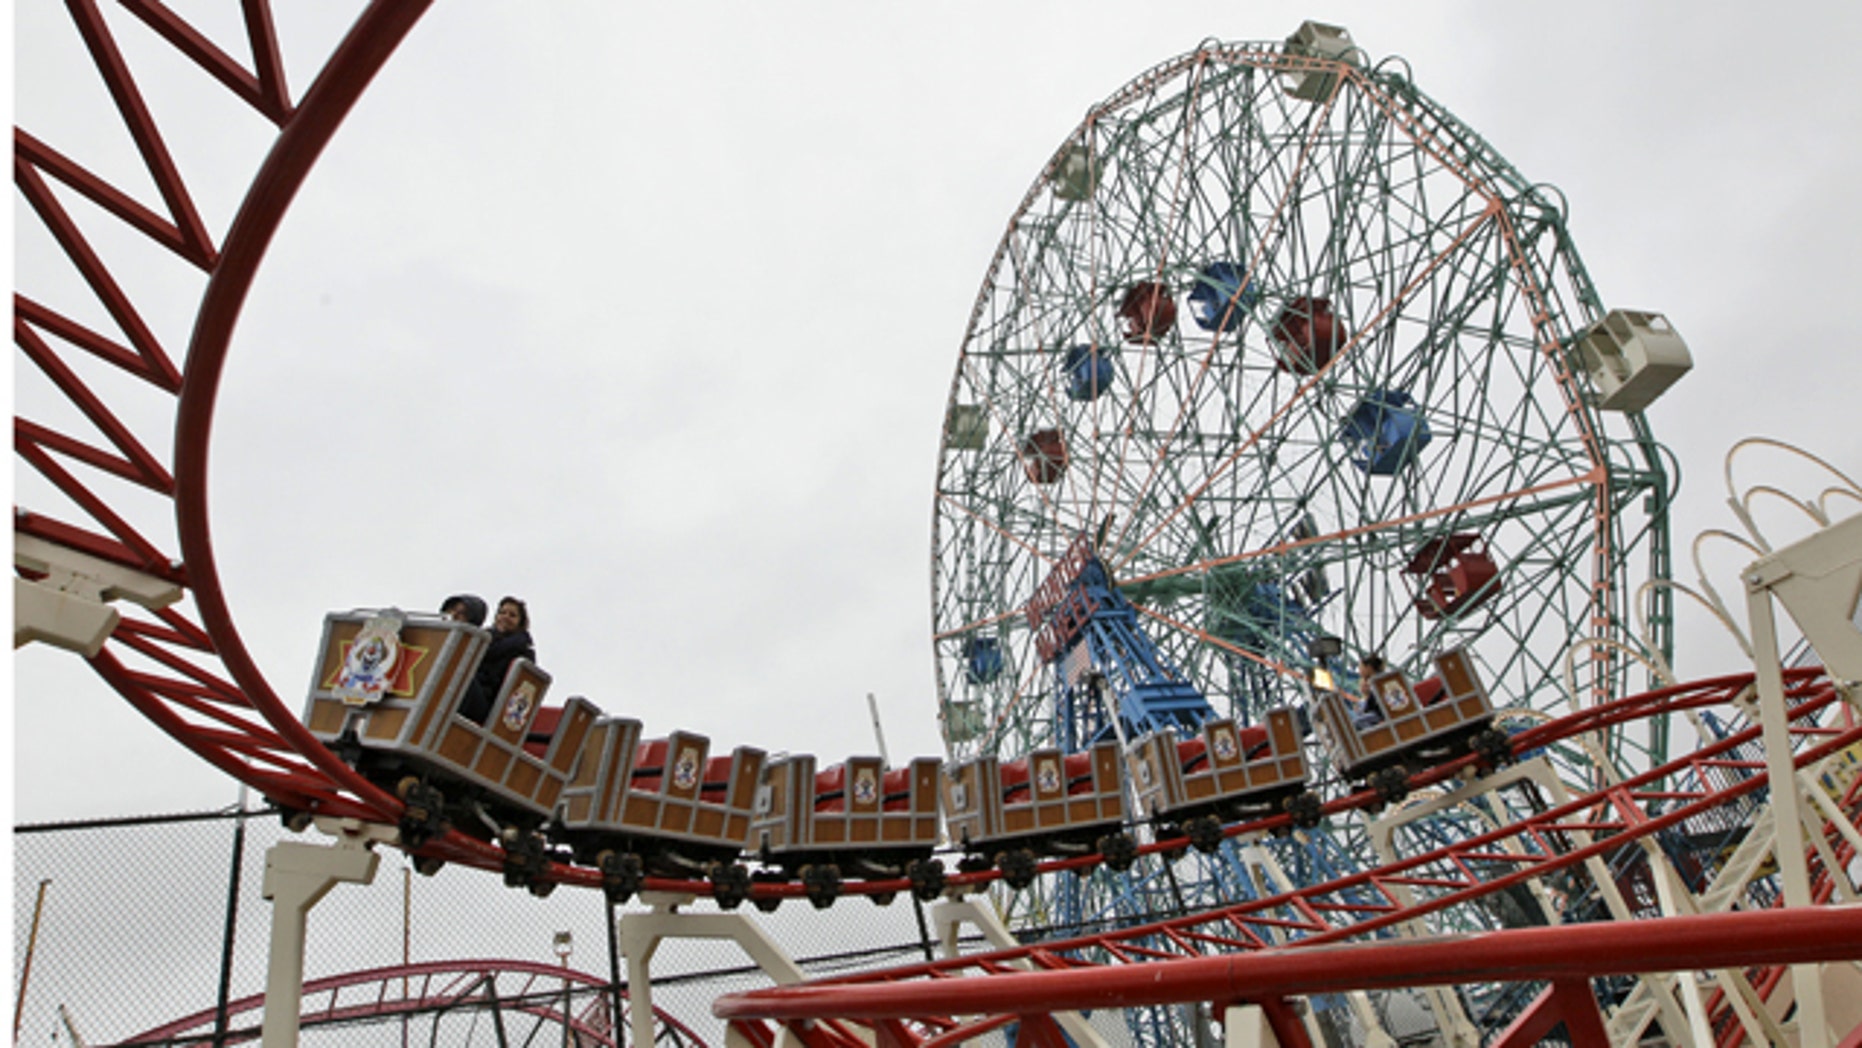 Personal Narrative: A Trip To Coney Island